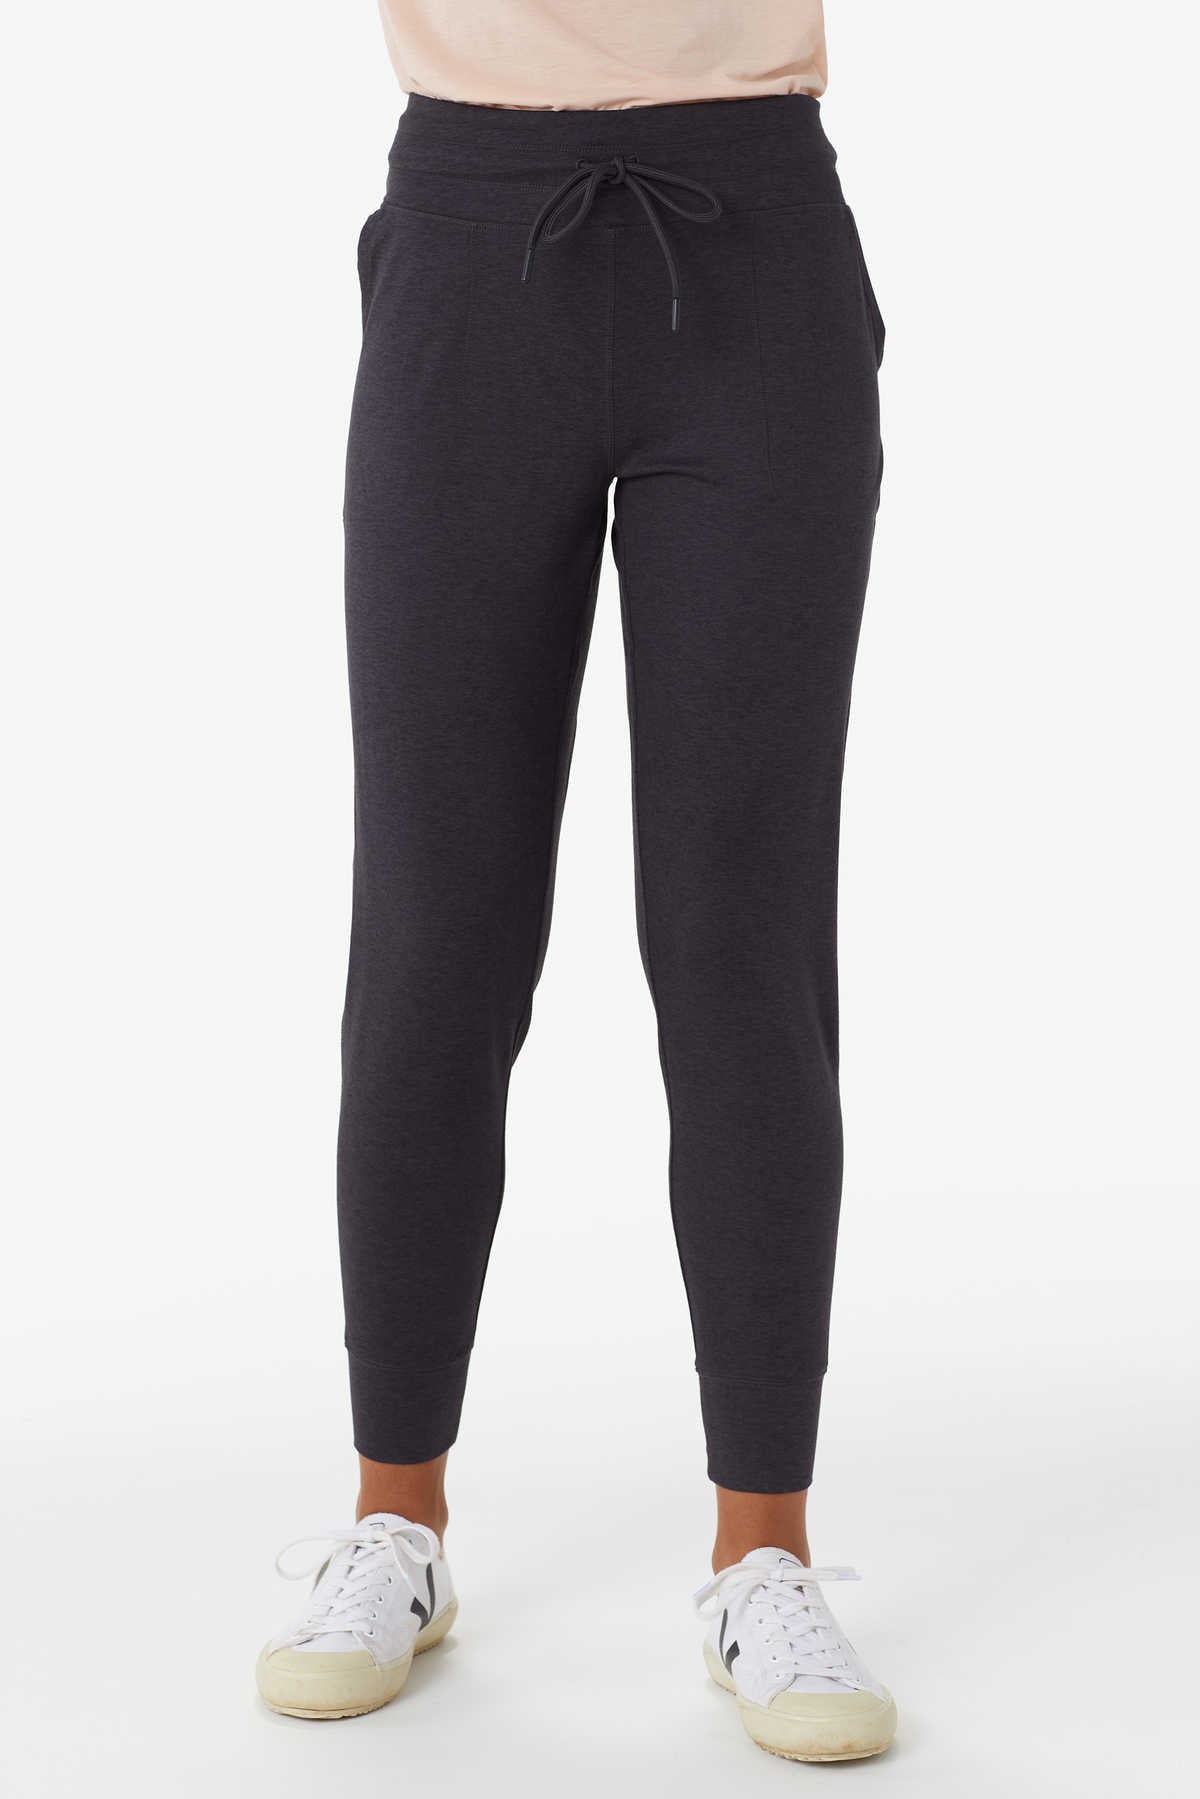 NEW Lole Women's High-Rise Stretch Pant, Lounge Pant, Jogger, Light Grey,  not_nwt - Lole – Buttons & Beans Co.